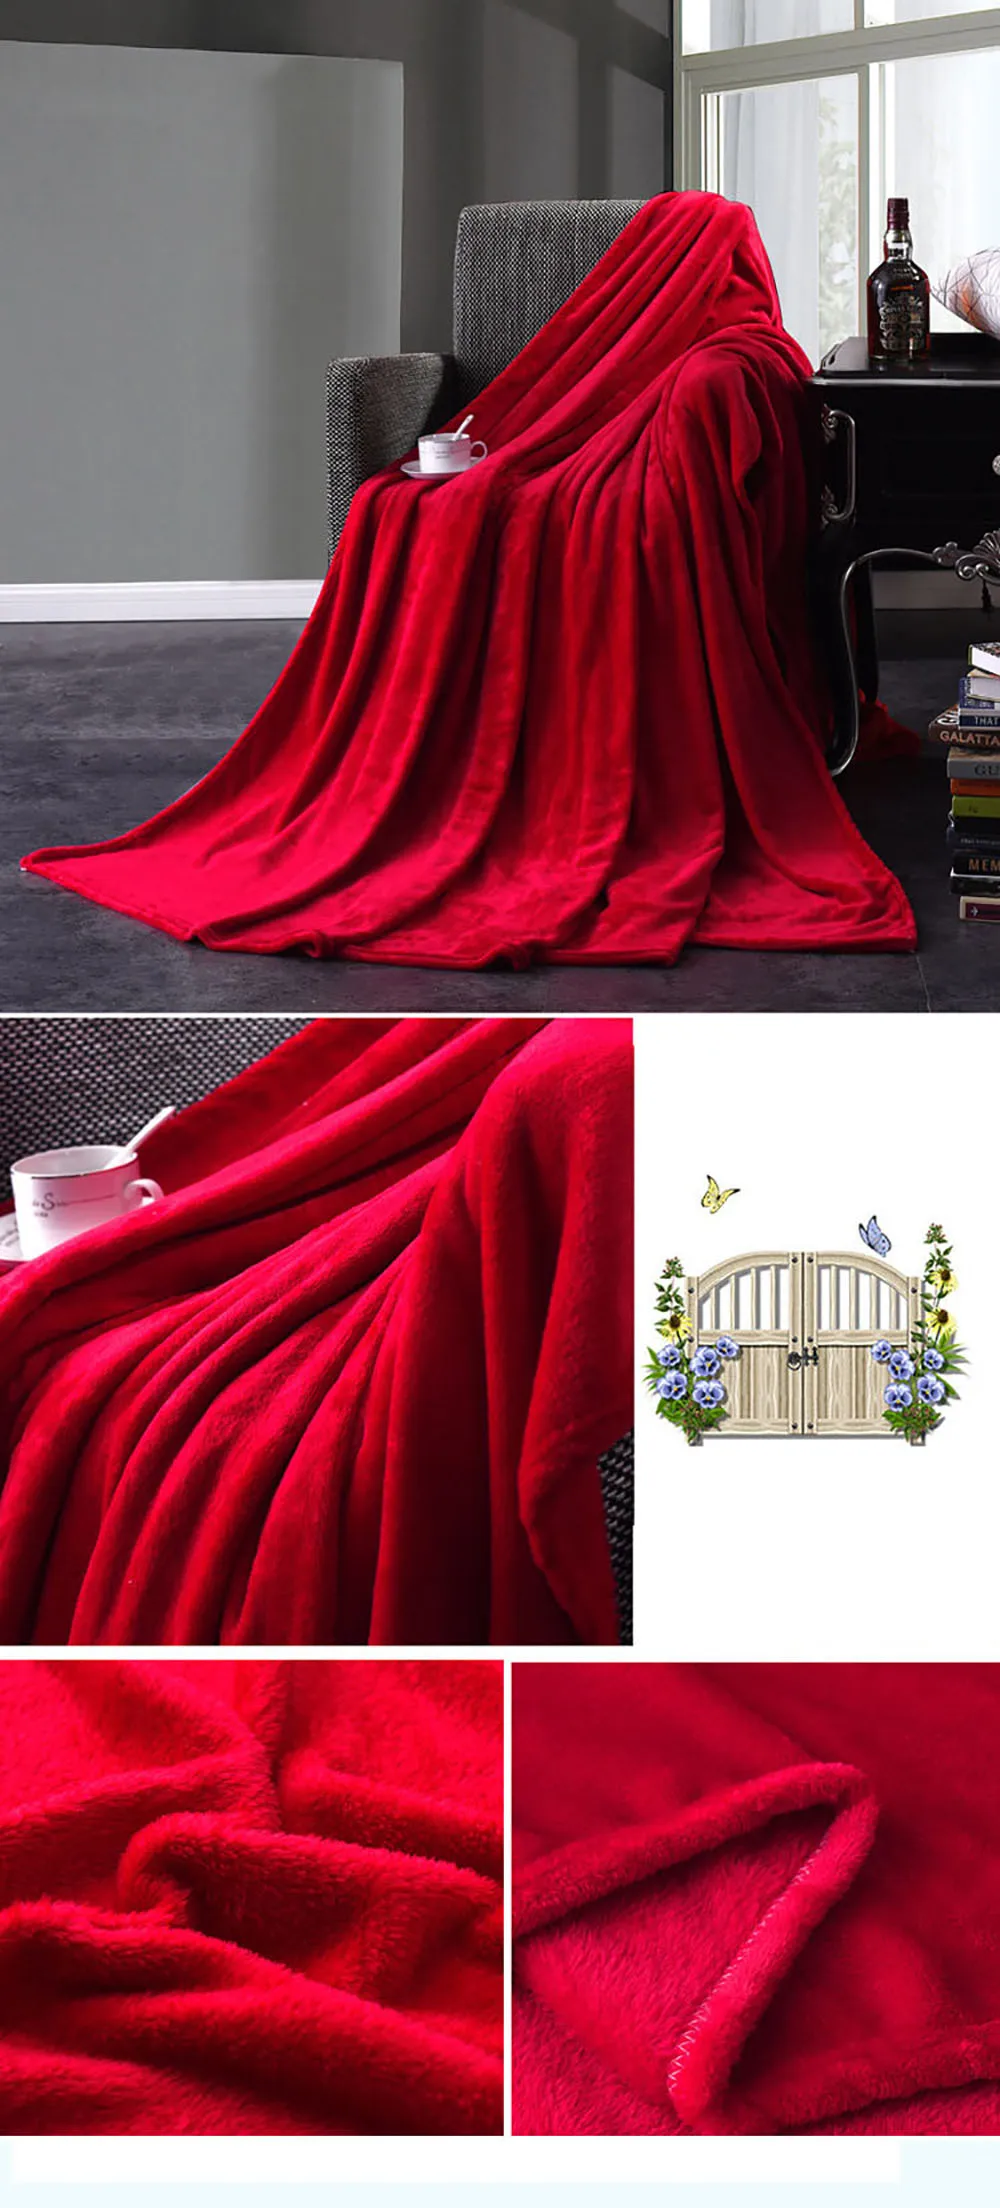 All Season Warm and Comfortable Anti-Pilling Flannel 40x50 Human Rib Cage Red Roses Red Blanket Ultra-Soft Lightweight Flannel Blanket Sofa Sofa